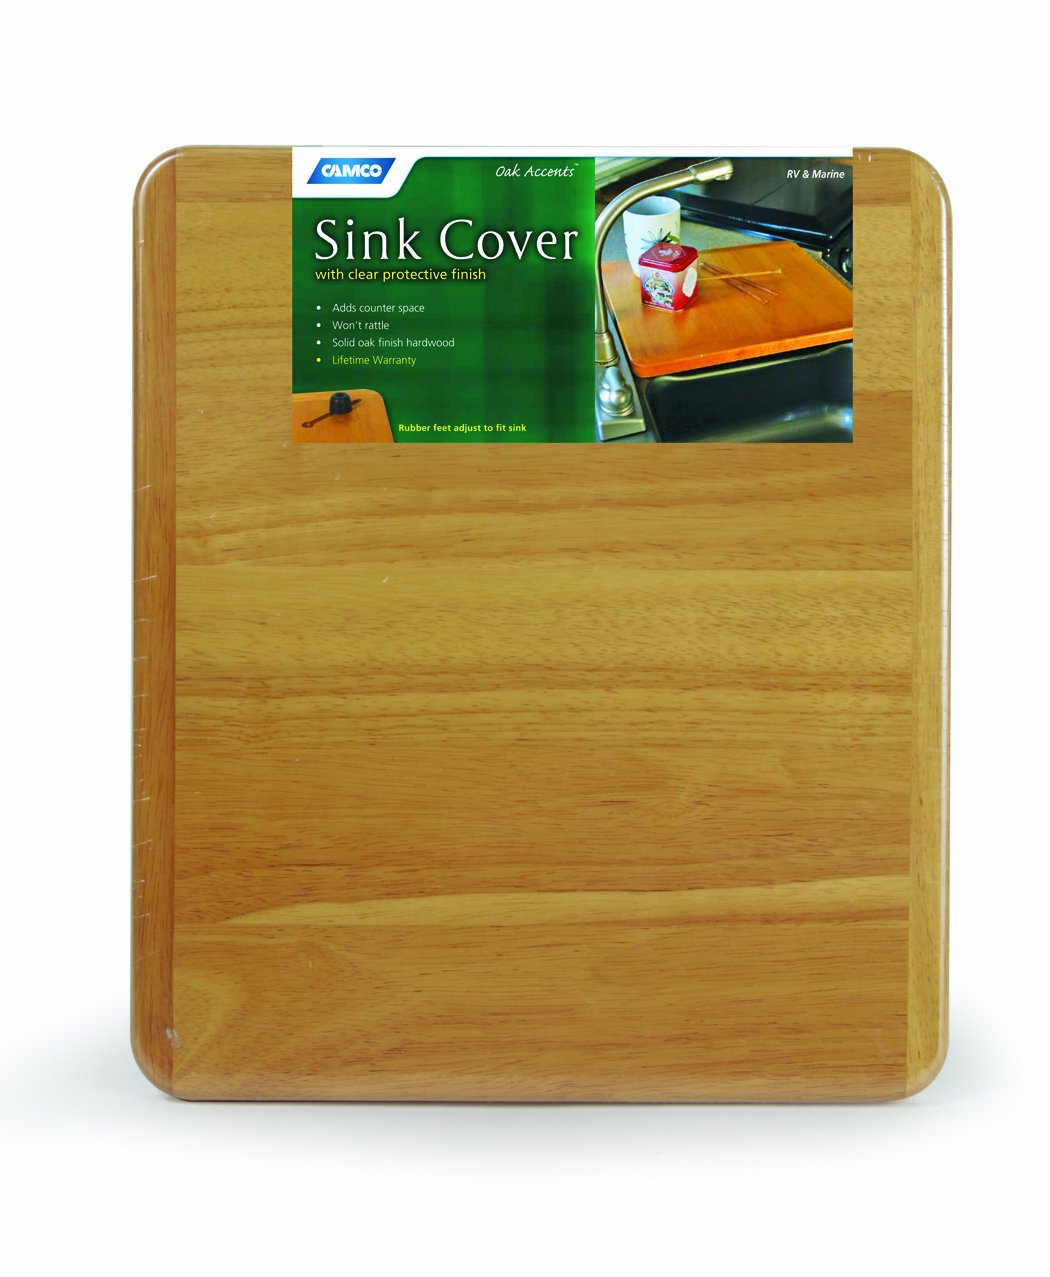 Camco Oak Accents RV Sink Cover- Adds Additional Counter and Cooking Space in Your Camper or RV Kitchen - Oak Wood Finish (43431)